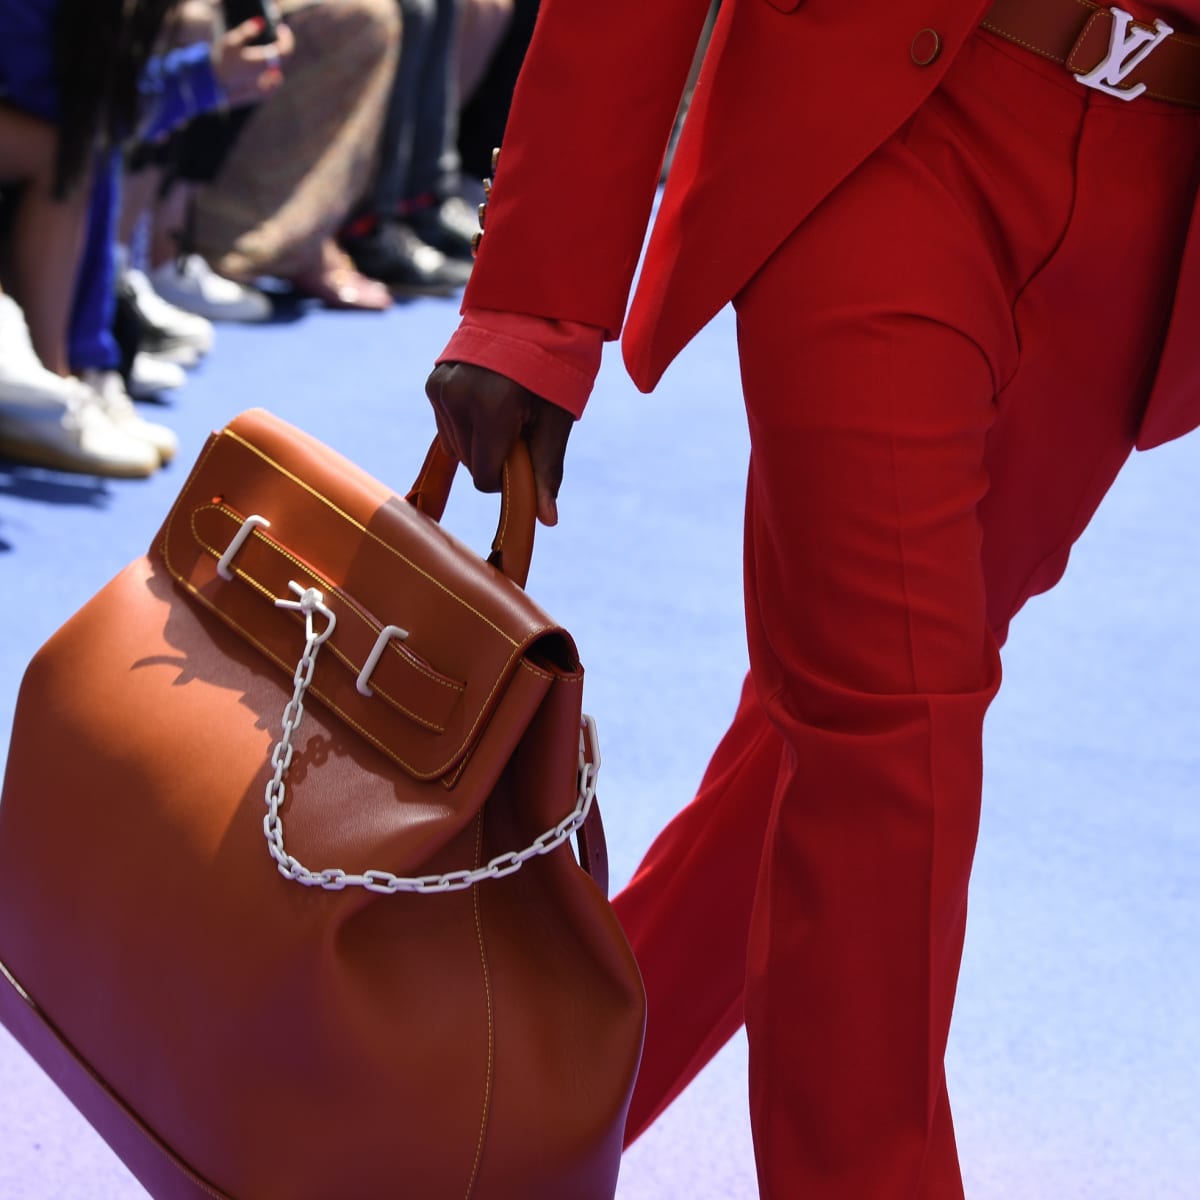 LVMH Had Another Record-Breaking Year for Sales in 2018 - Fashionista